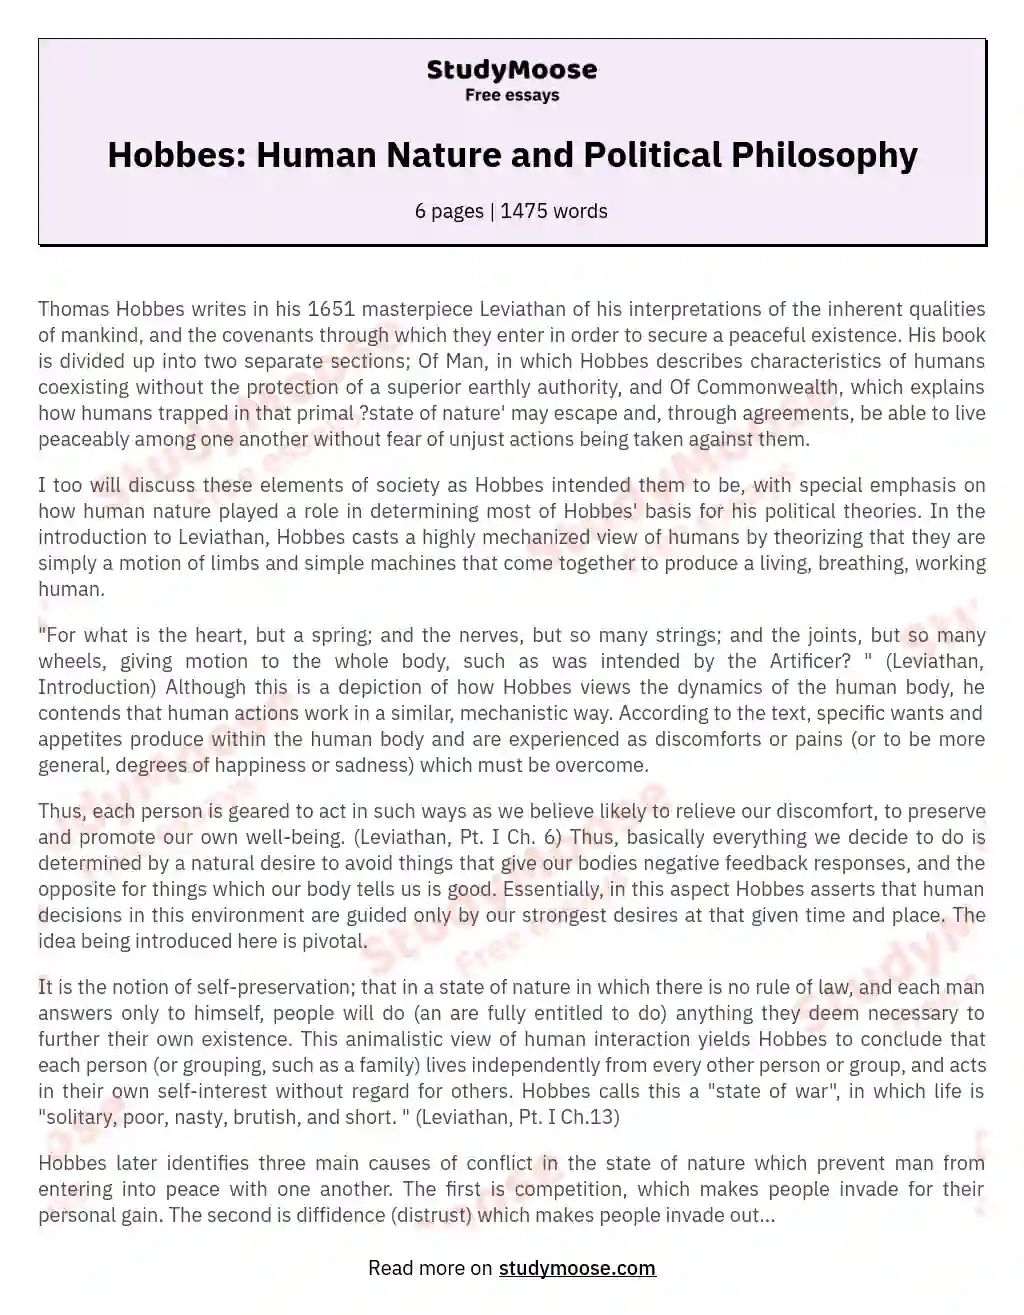 Hobbes: Human Nature and Political Philosophy essay